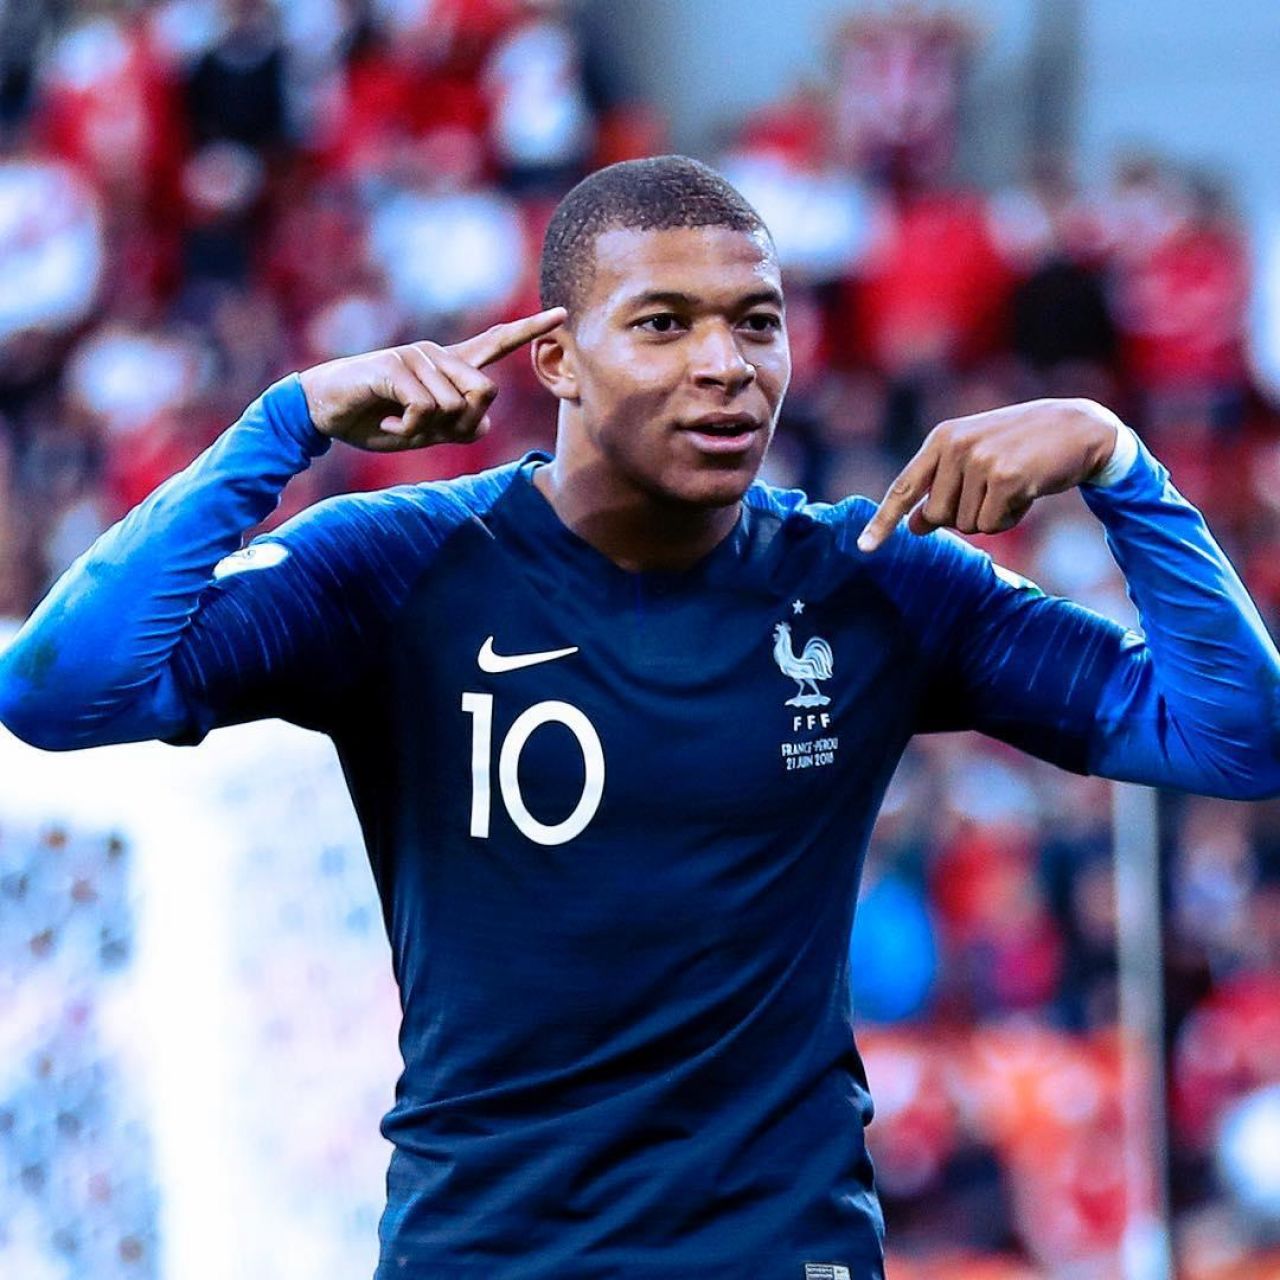 The jersey of the team of France World cup 2018 worn by Kylian Mbappé on th...